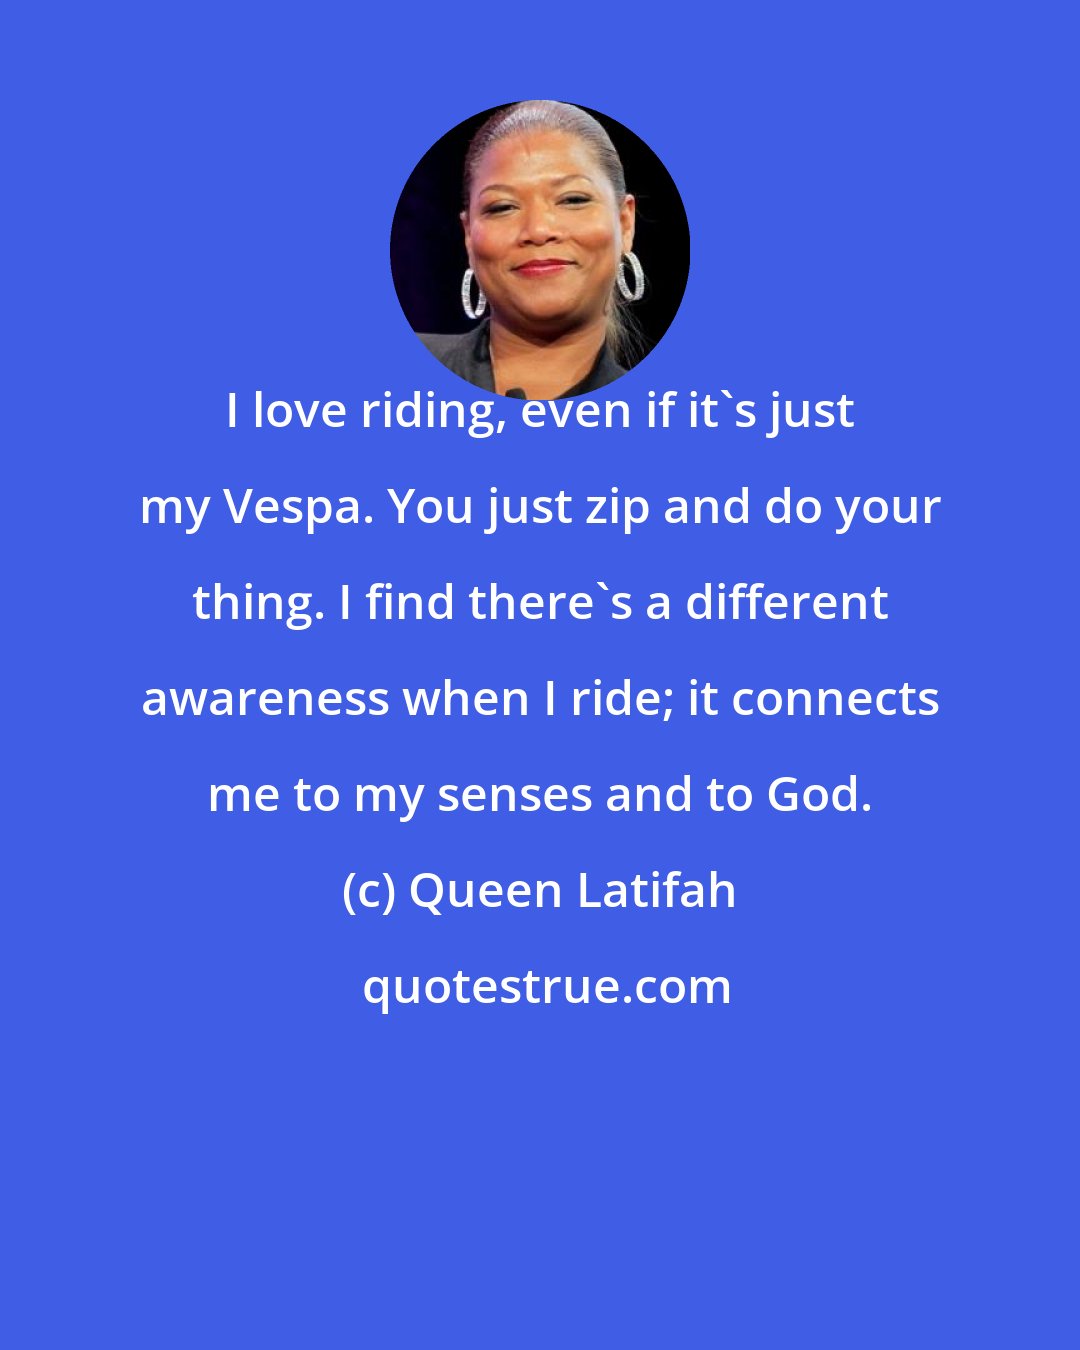 Queen Latifah: I love riding, even if it's just my Vespa. You just zip and do your thing. I find there's a different awareness when I ride; it connects me to my senses and to God.